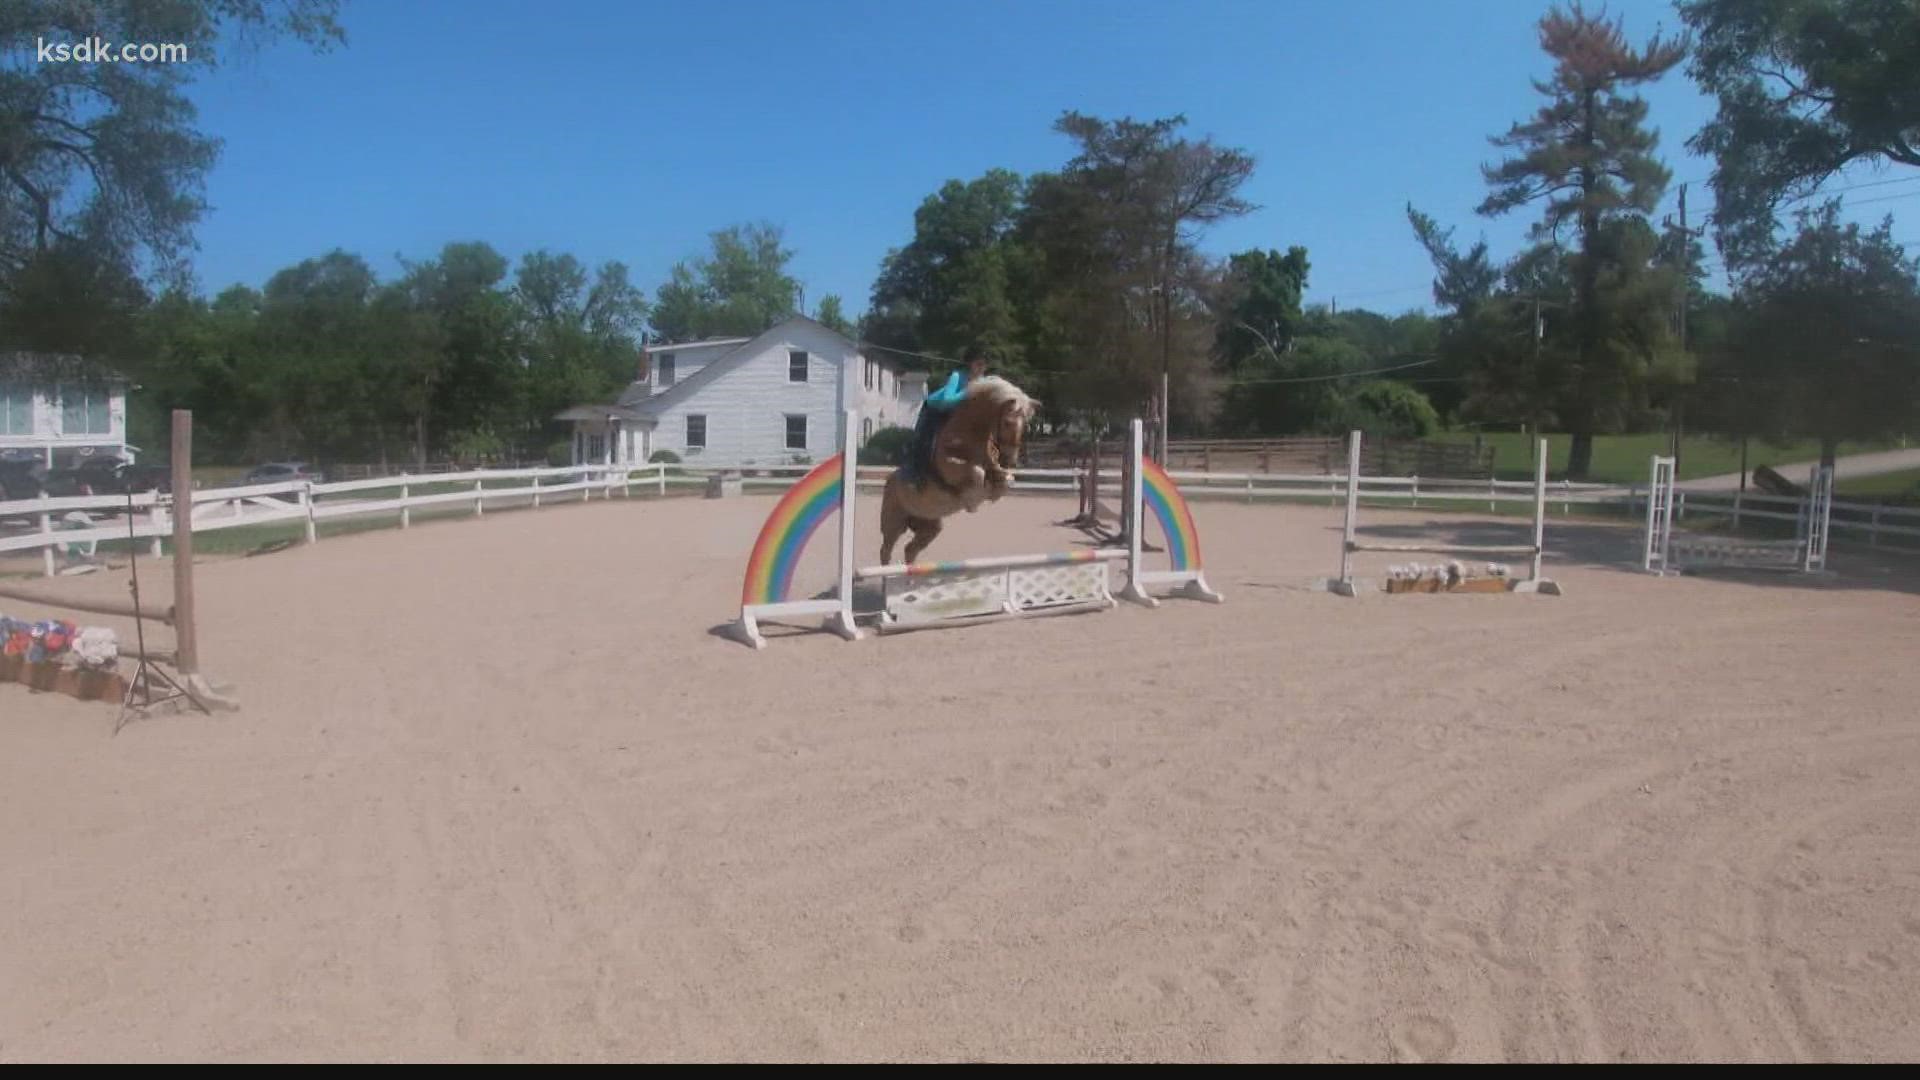 Rene Knott takes us to a St. Louis area farm to learn the secrets of equestrian riding.